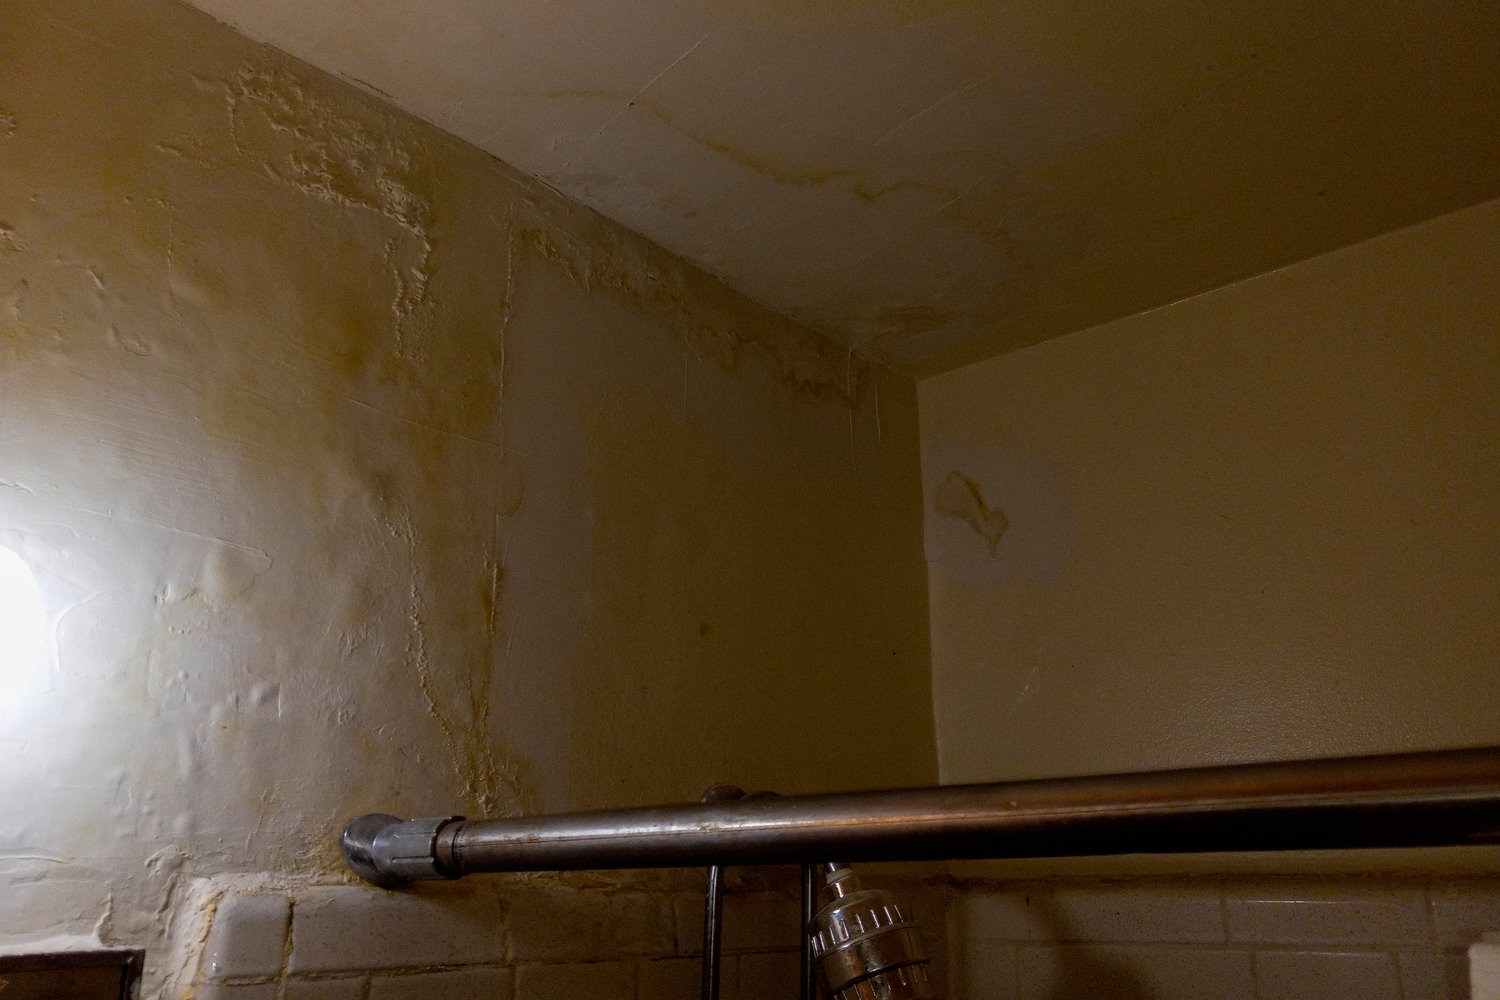 Margaret Cullen says it’s impossible not to see the water damage and mildew throughout the bathroom in her 3400 Fort Independence St., co-op — caused by several leaks and floods. Her building has received several violations from the city, but Cullen says nothing has been done to rectify the damages.